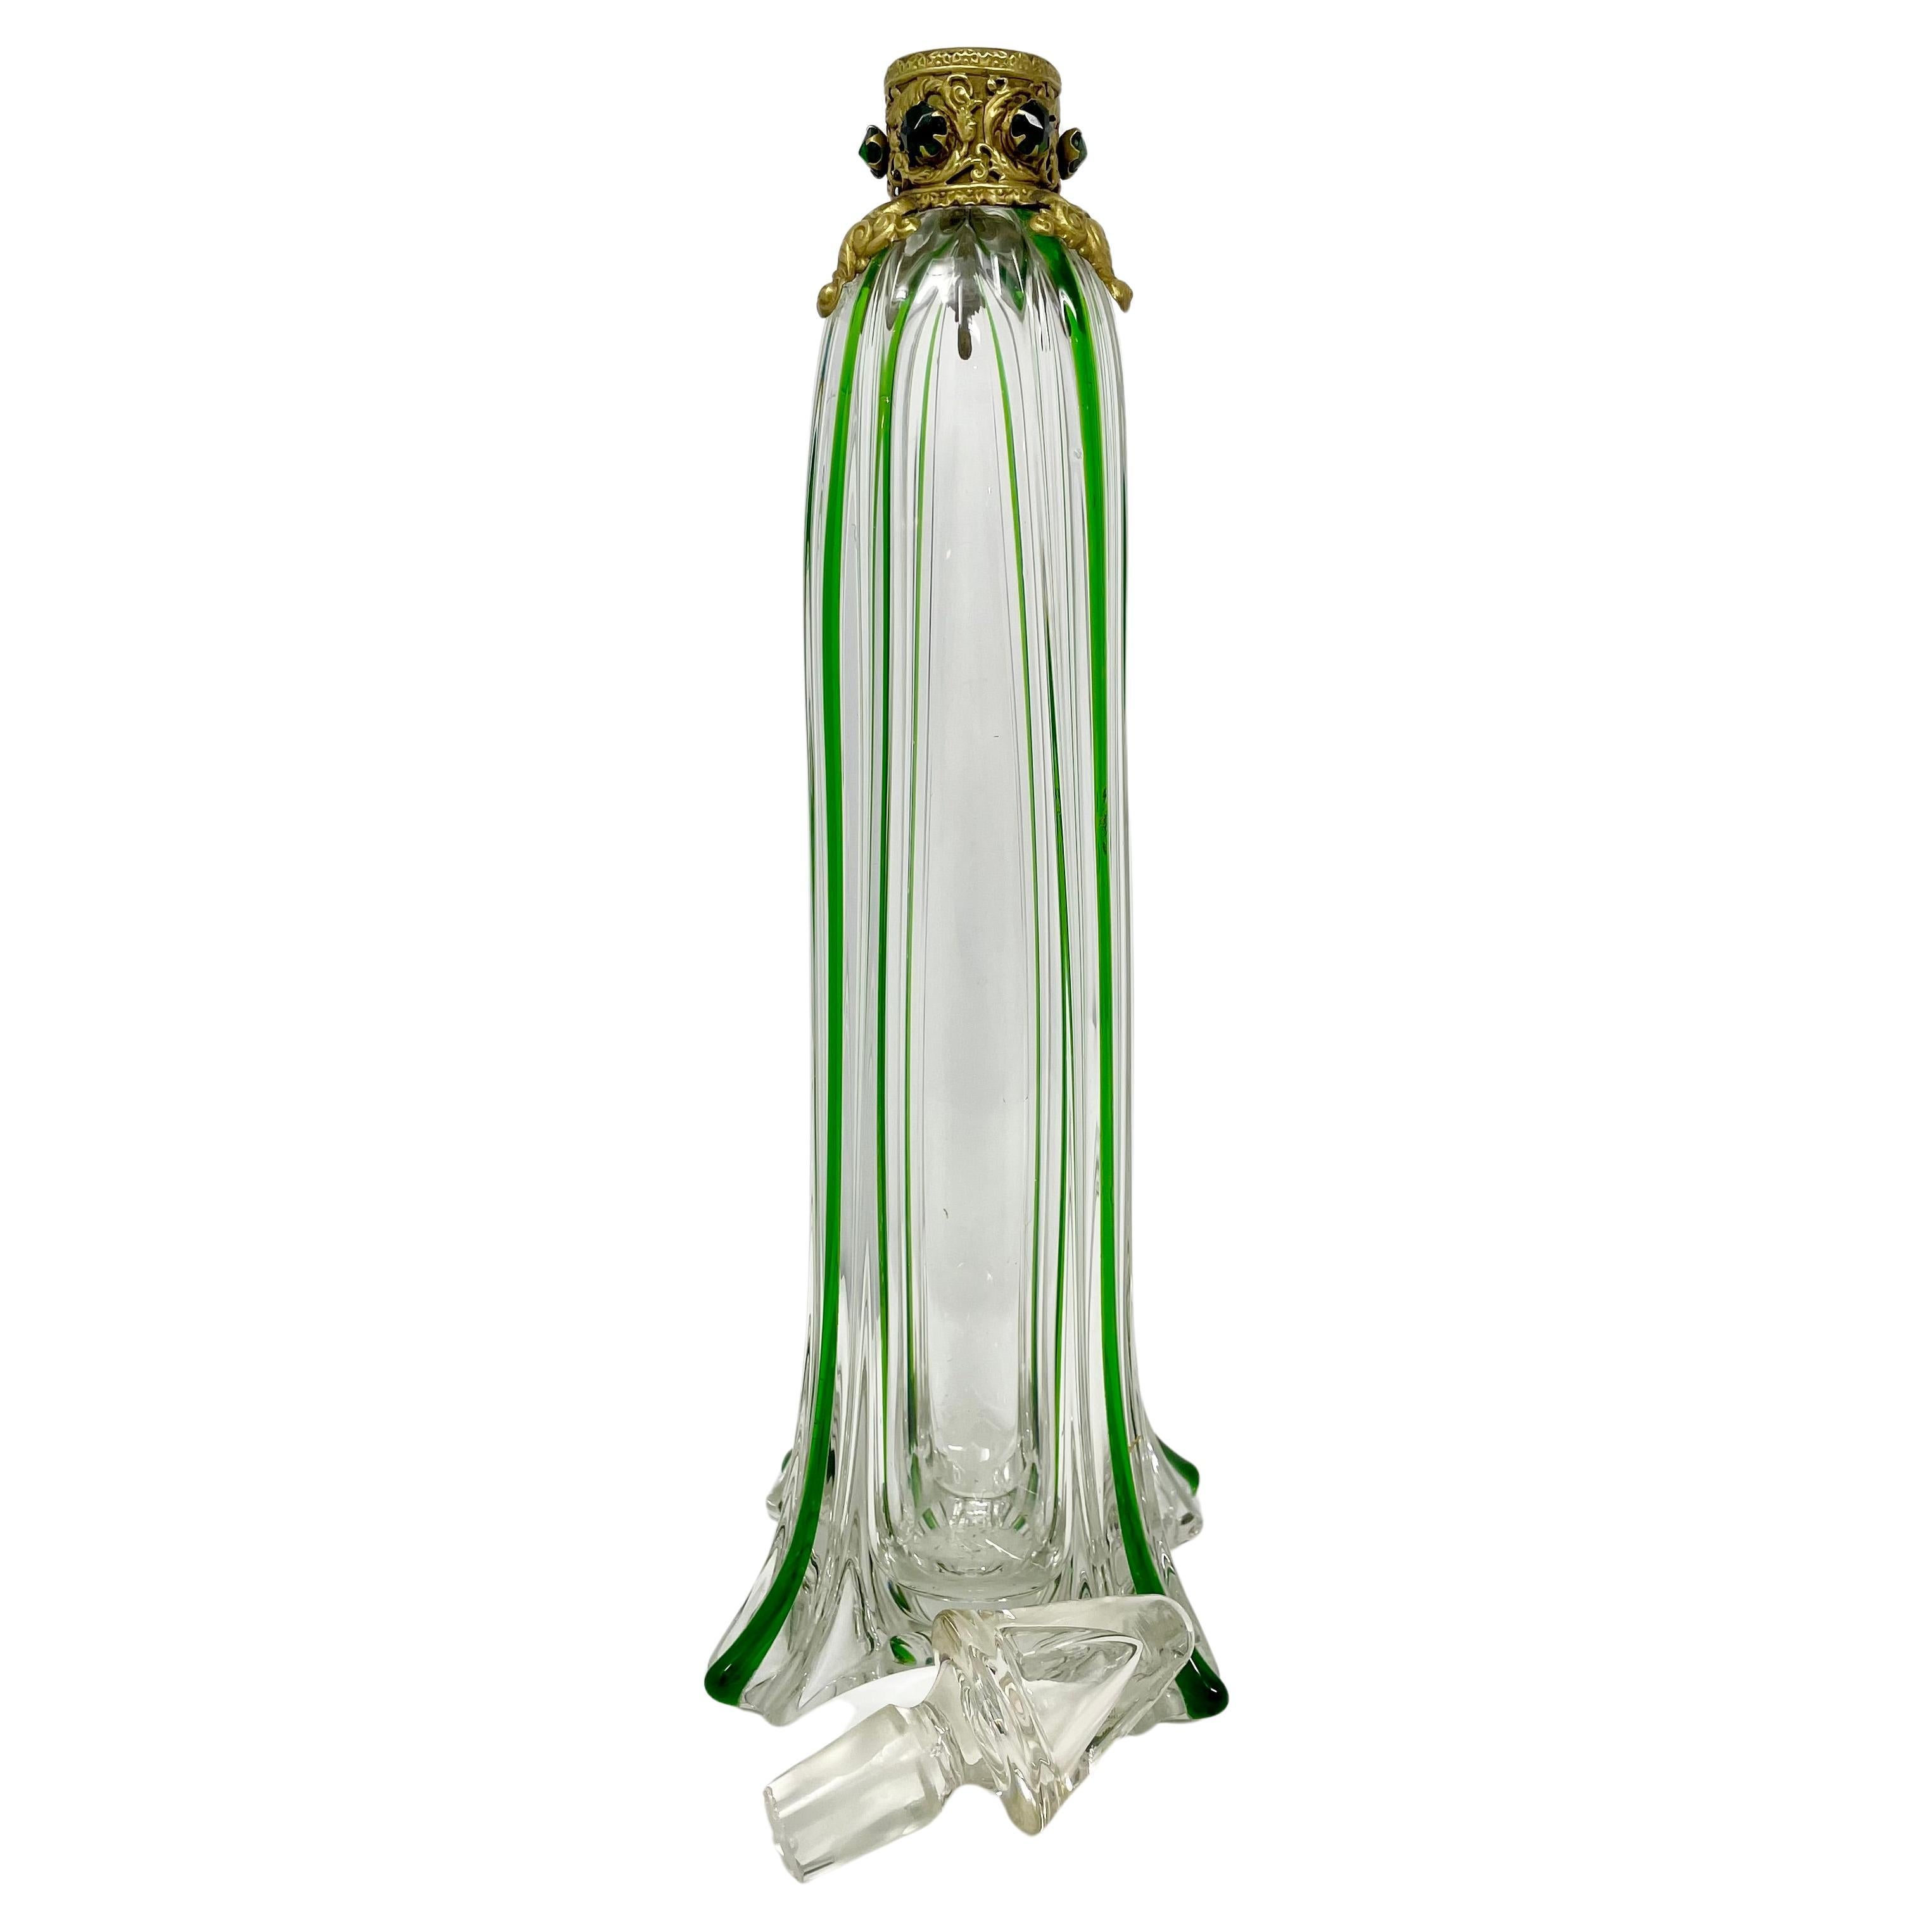 Antique Gold Bronze and Green & Clear Hand-Blown Glass Scent Bottle, Circa 1900 For Sale 1